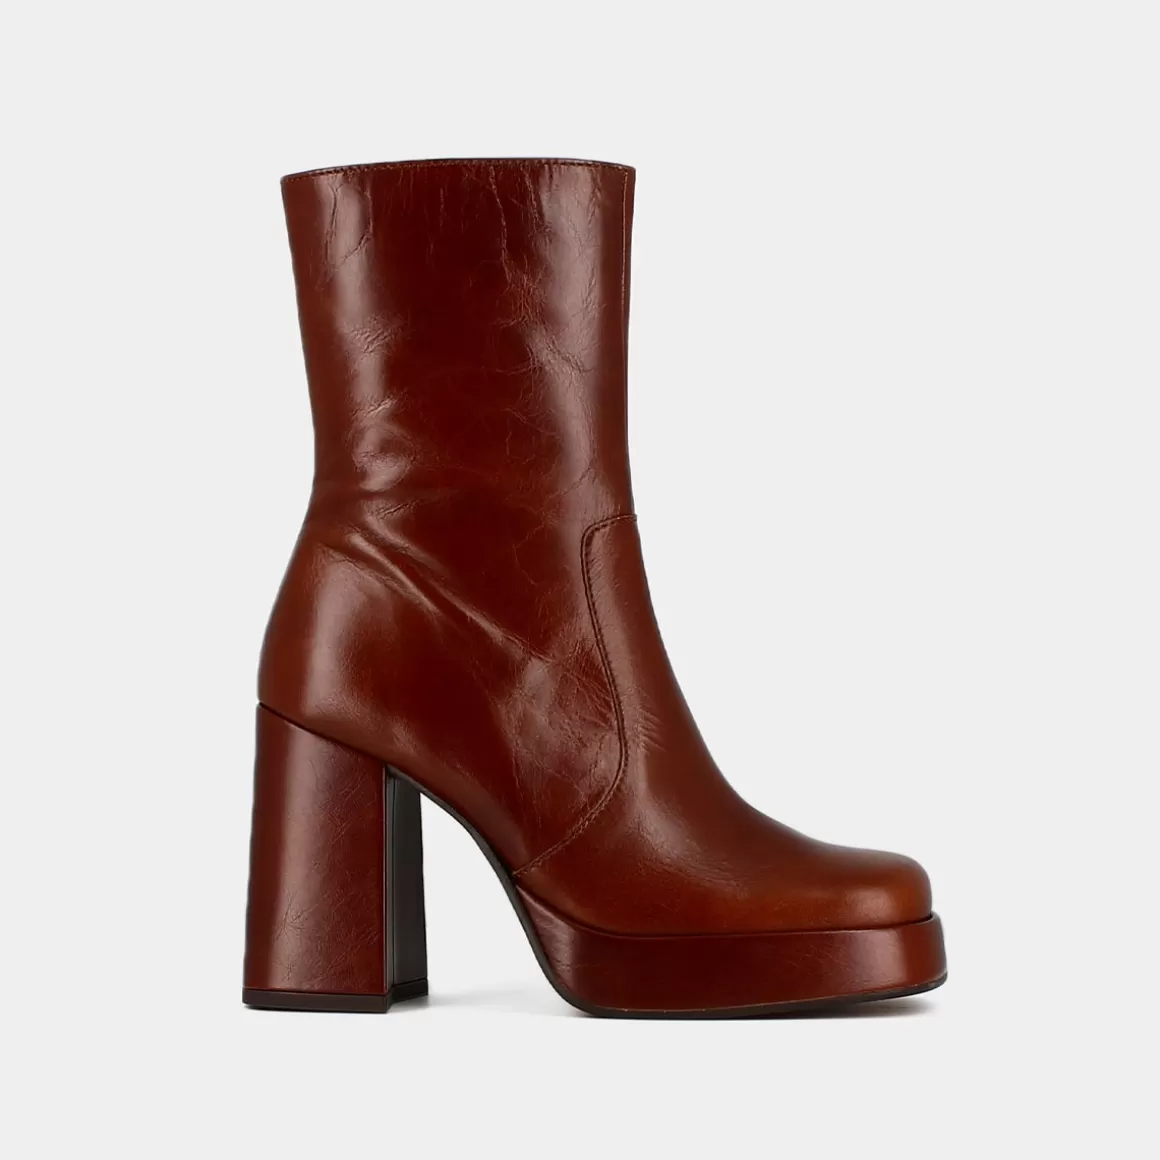 Boots with heels and square toes<Jonak Clearance